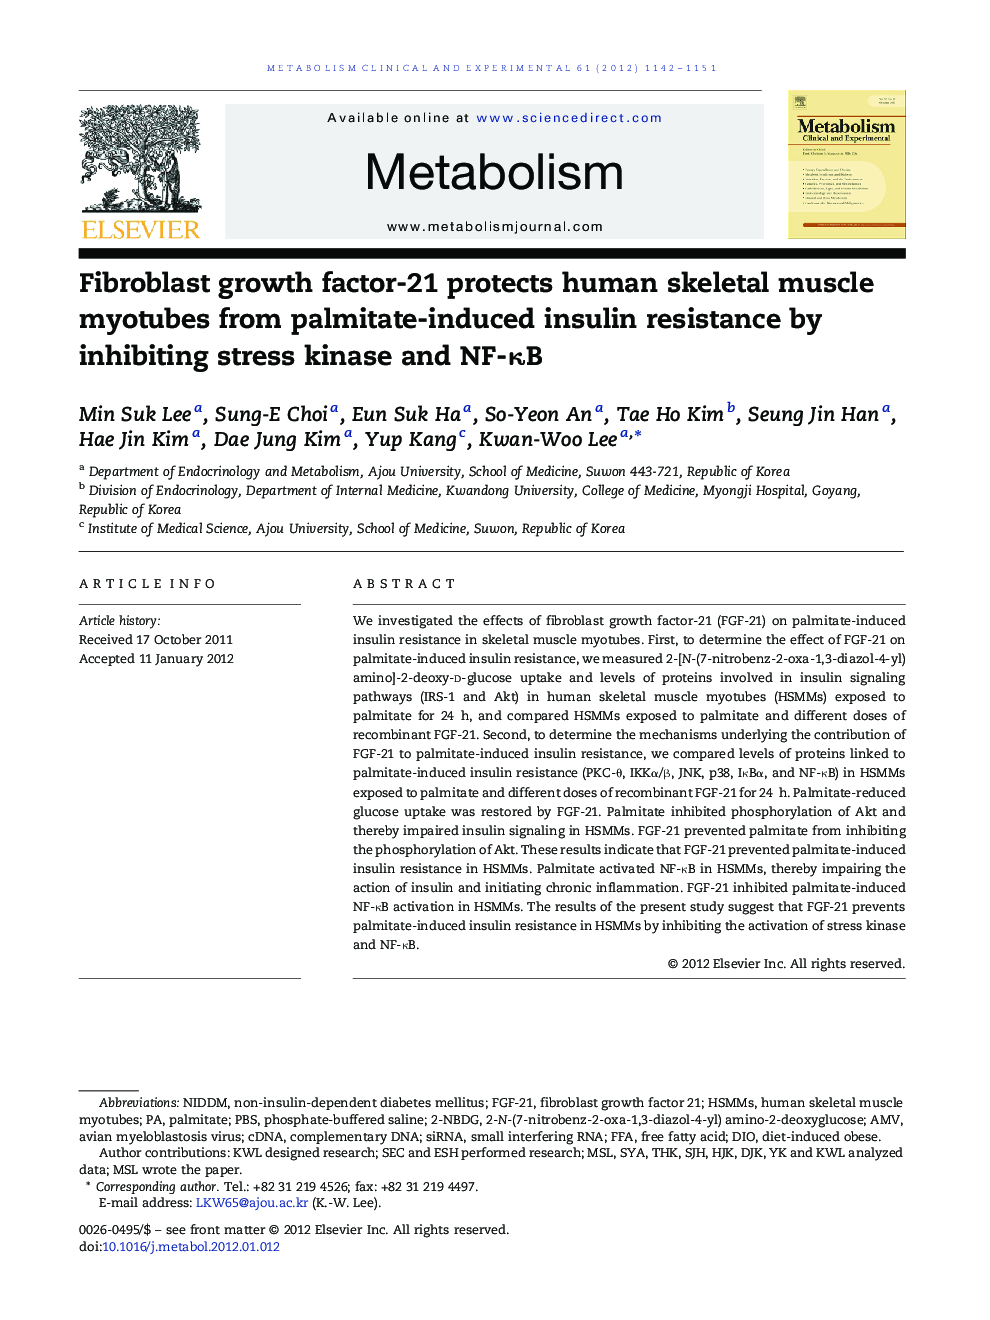 Fibroblast growth factor-21 protects human skeletal muscle myotubes from palmitate-induced insulin resistance by inhibiting stress kinase and NF-ÎºB